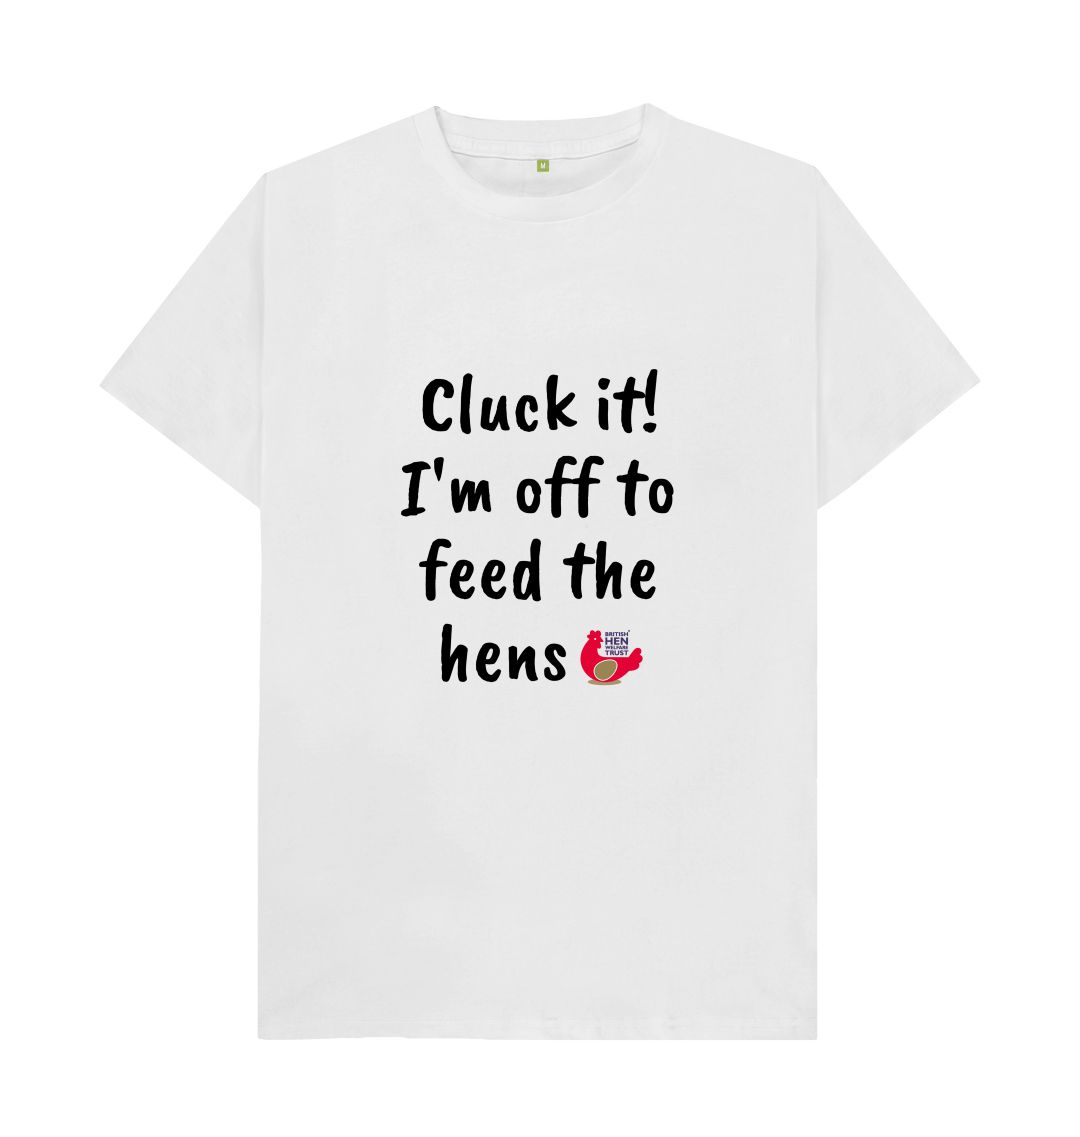 White Cluck it! I'm off to feed the hens Unisex T-shirt